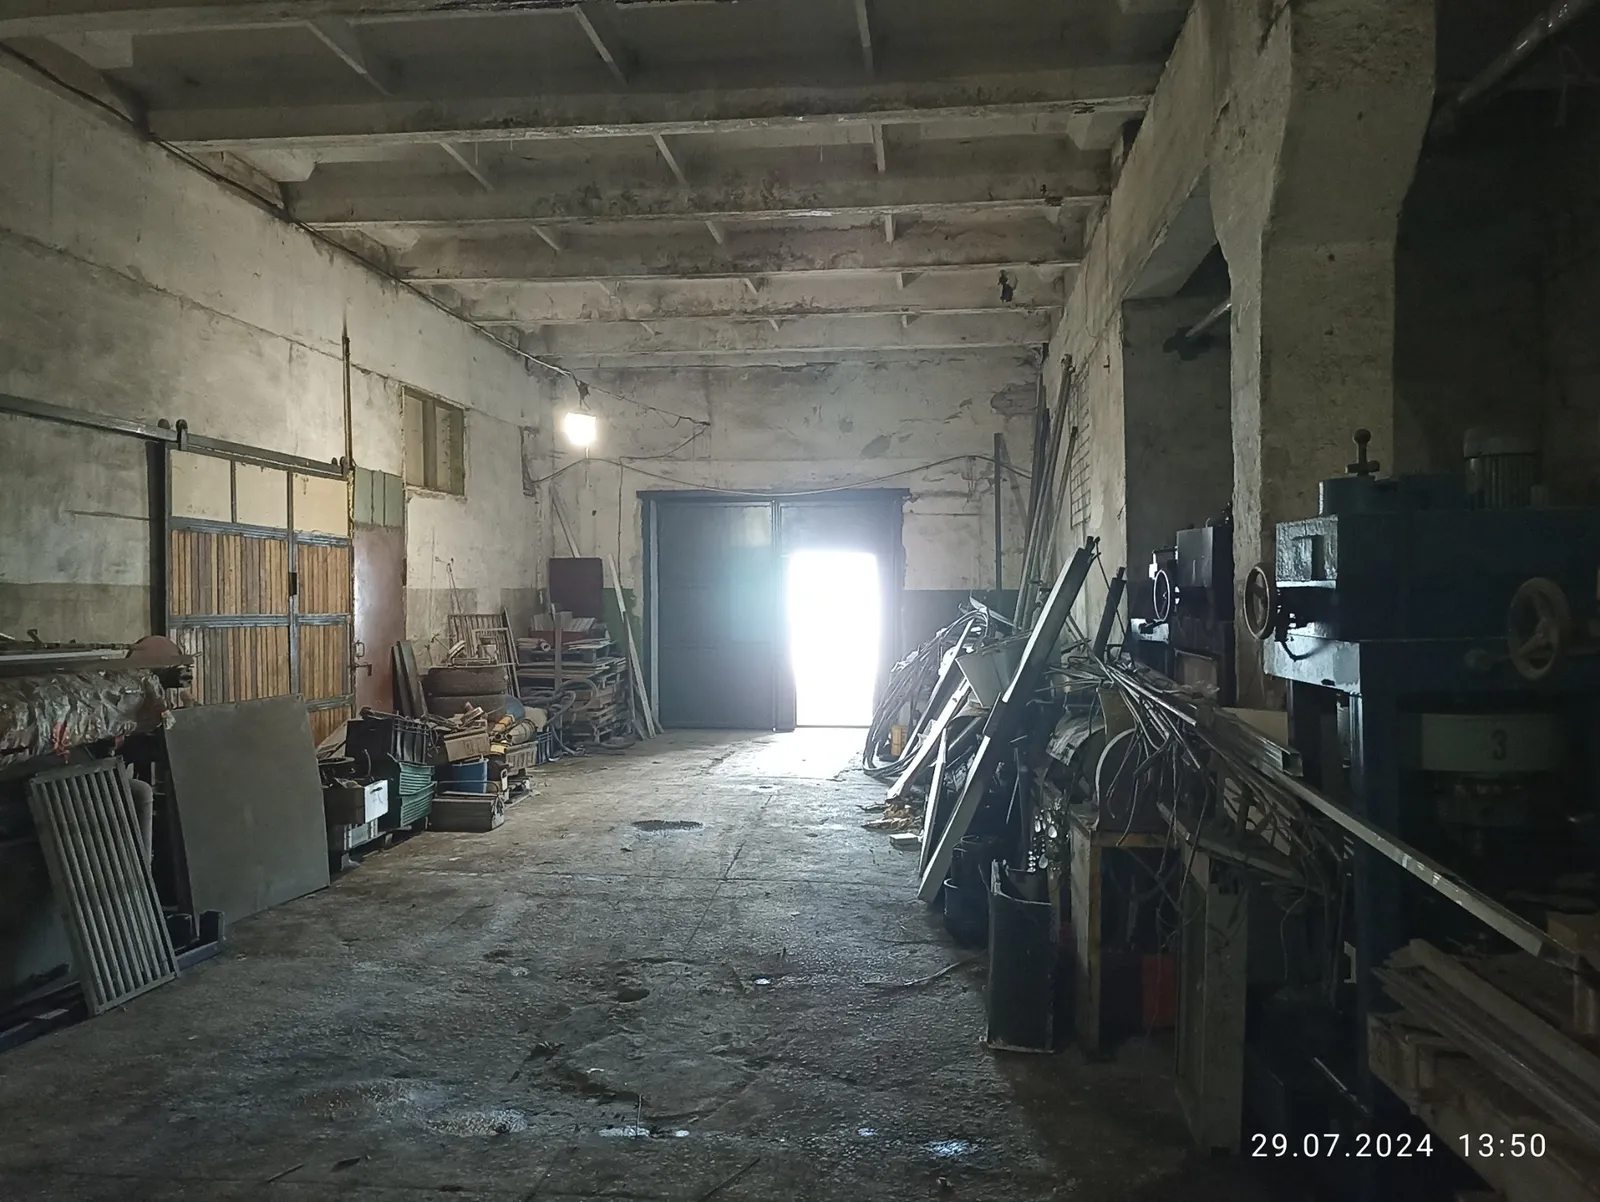 Property for sale for production purposes. 200 m². Heroev Stalynhrada ul., Dnipro. 